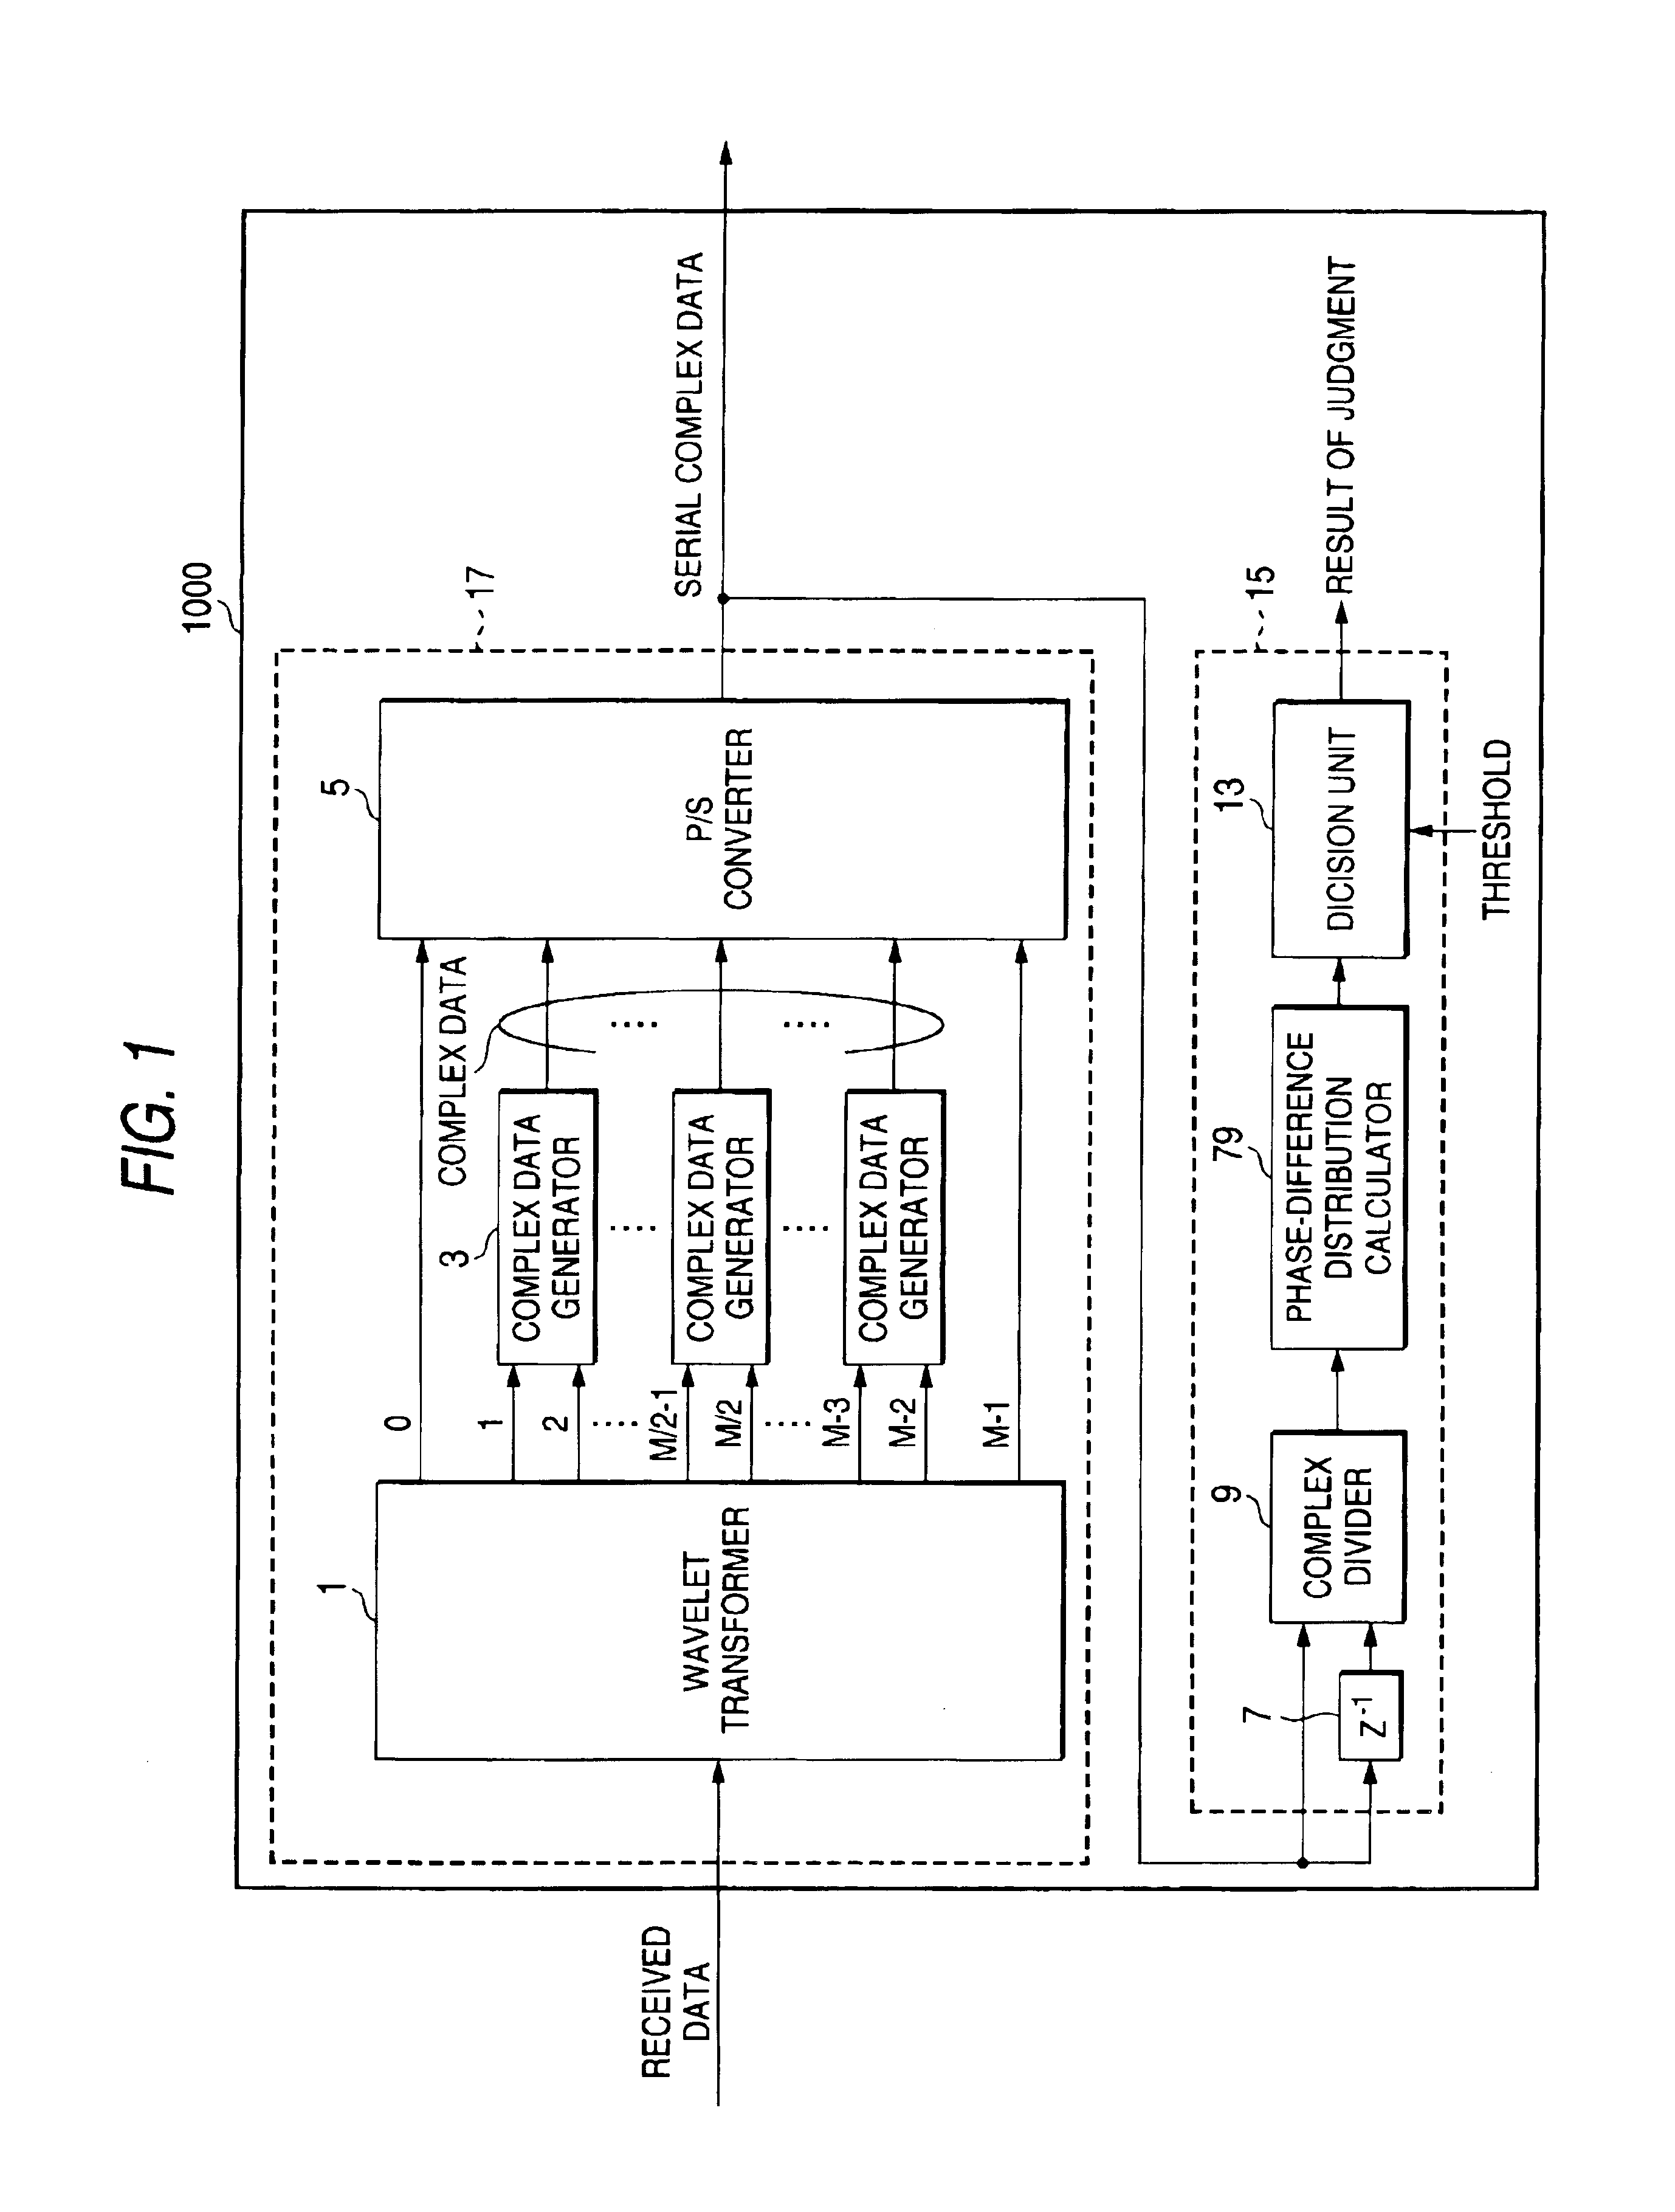 Receiving apparatus and method for digital multi-carrier transmission